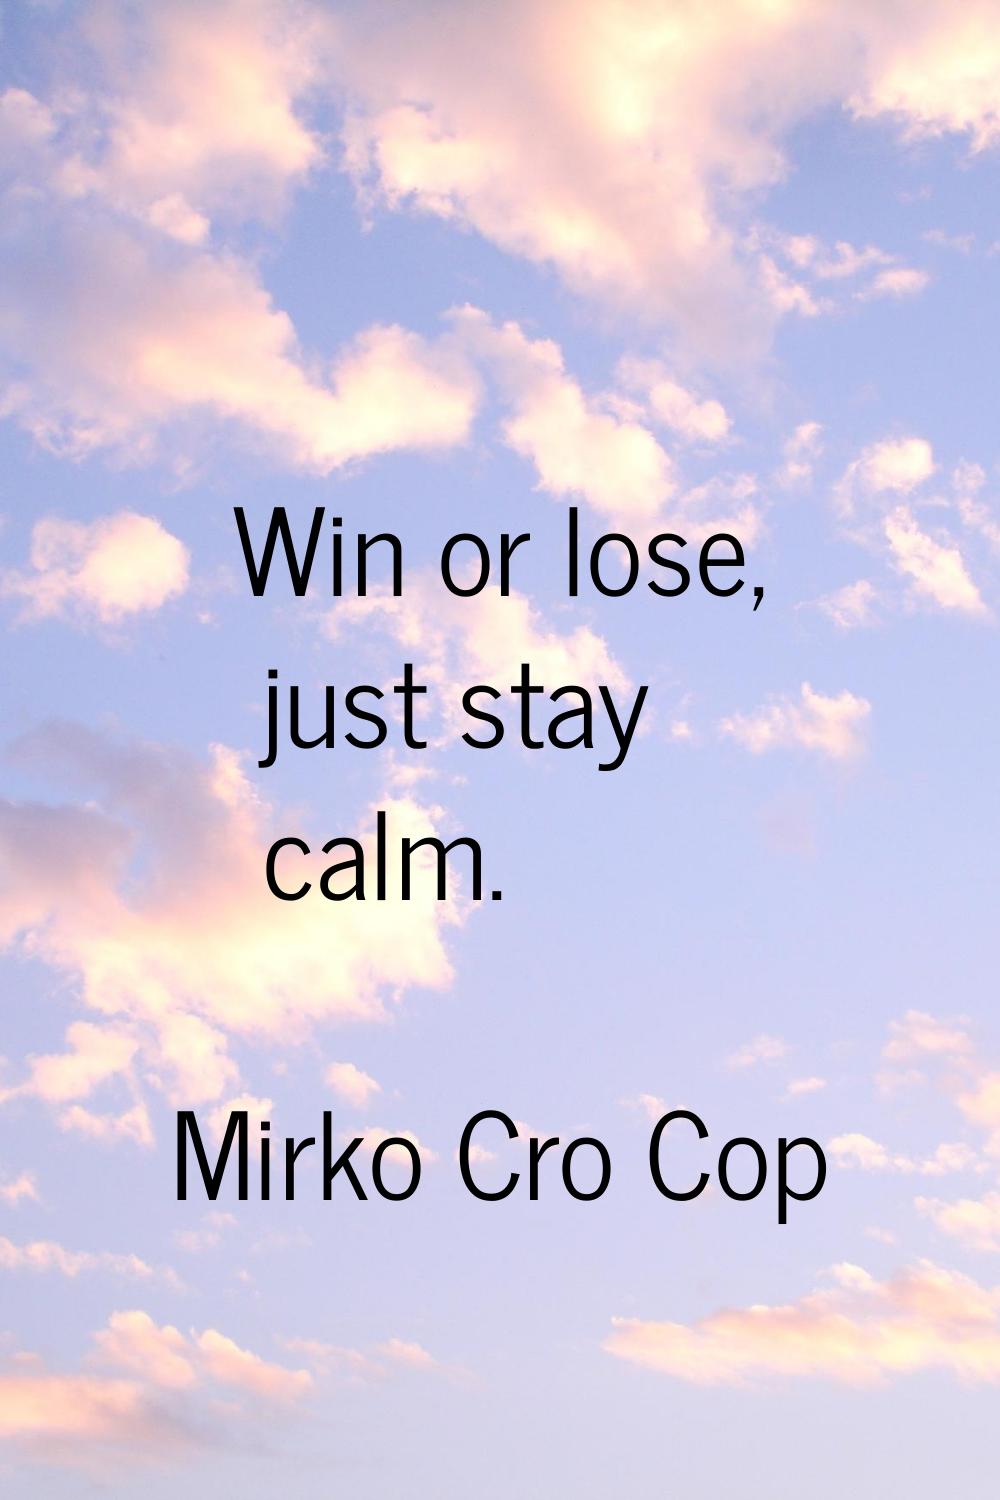 Win or lose, just stay calm.